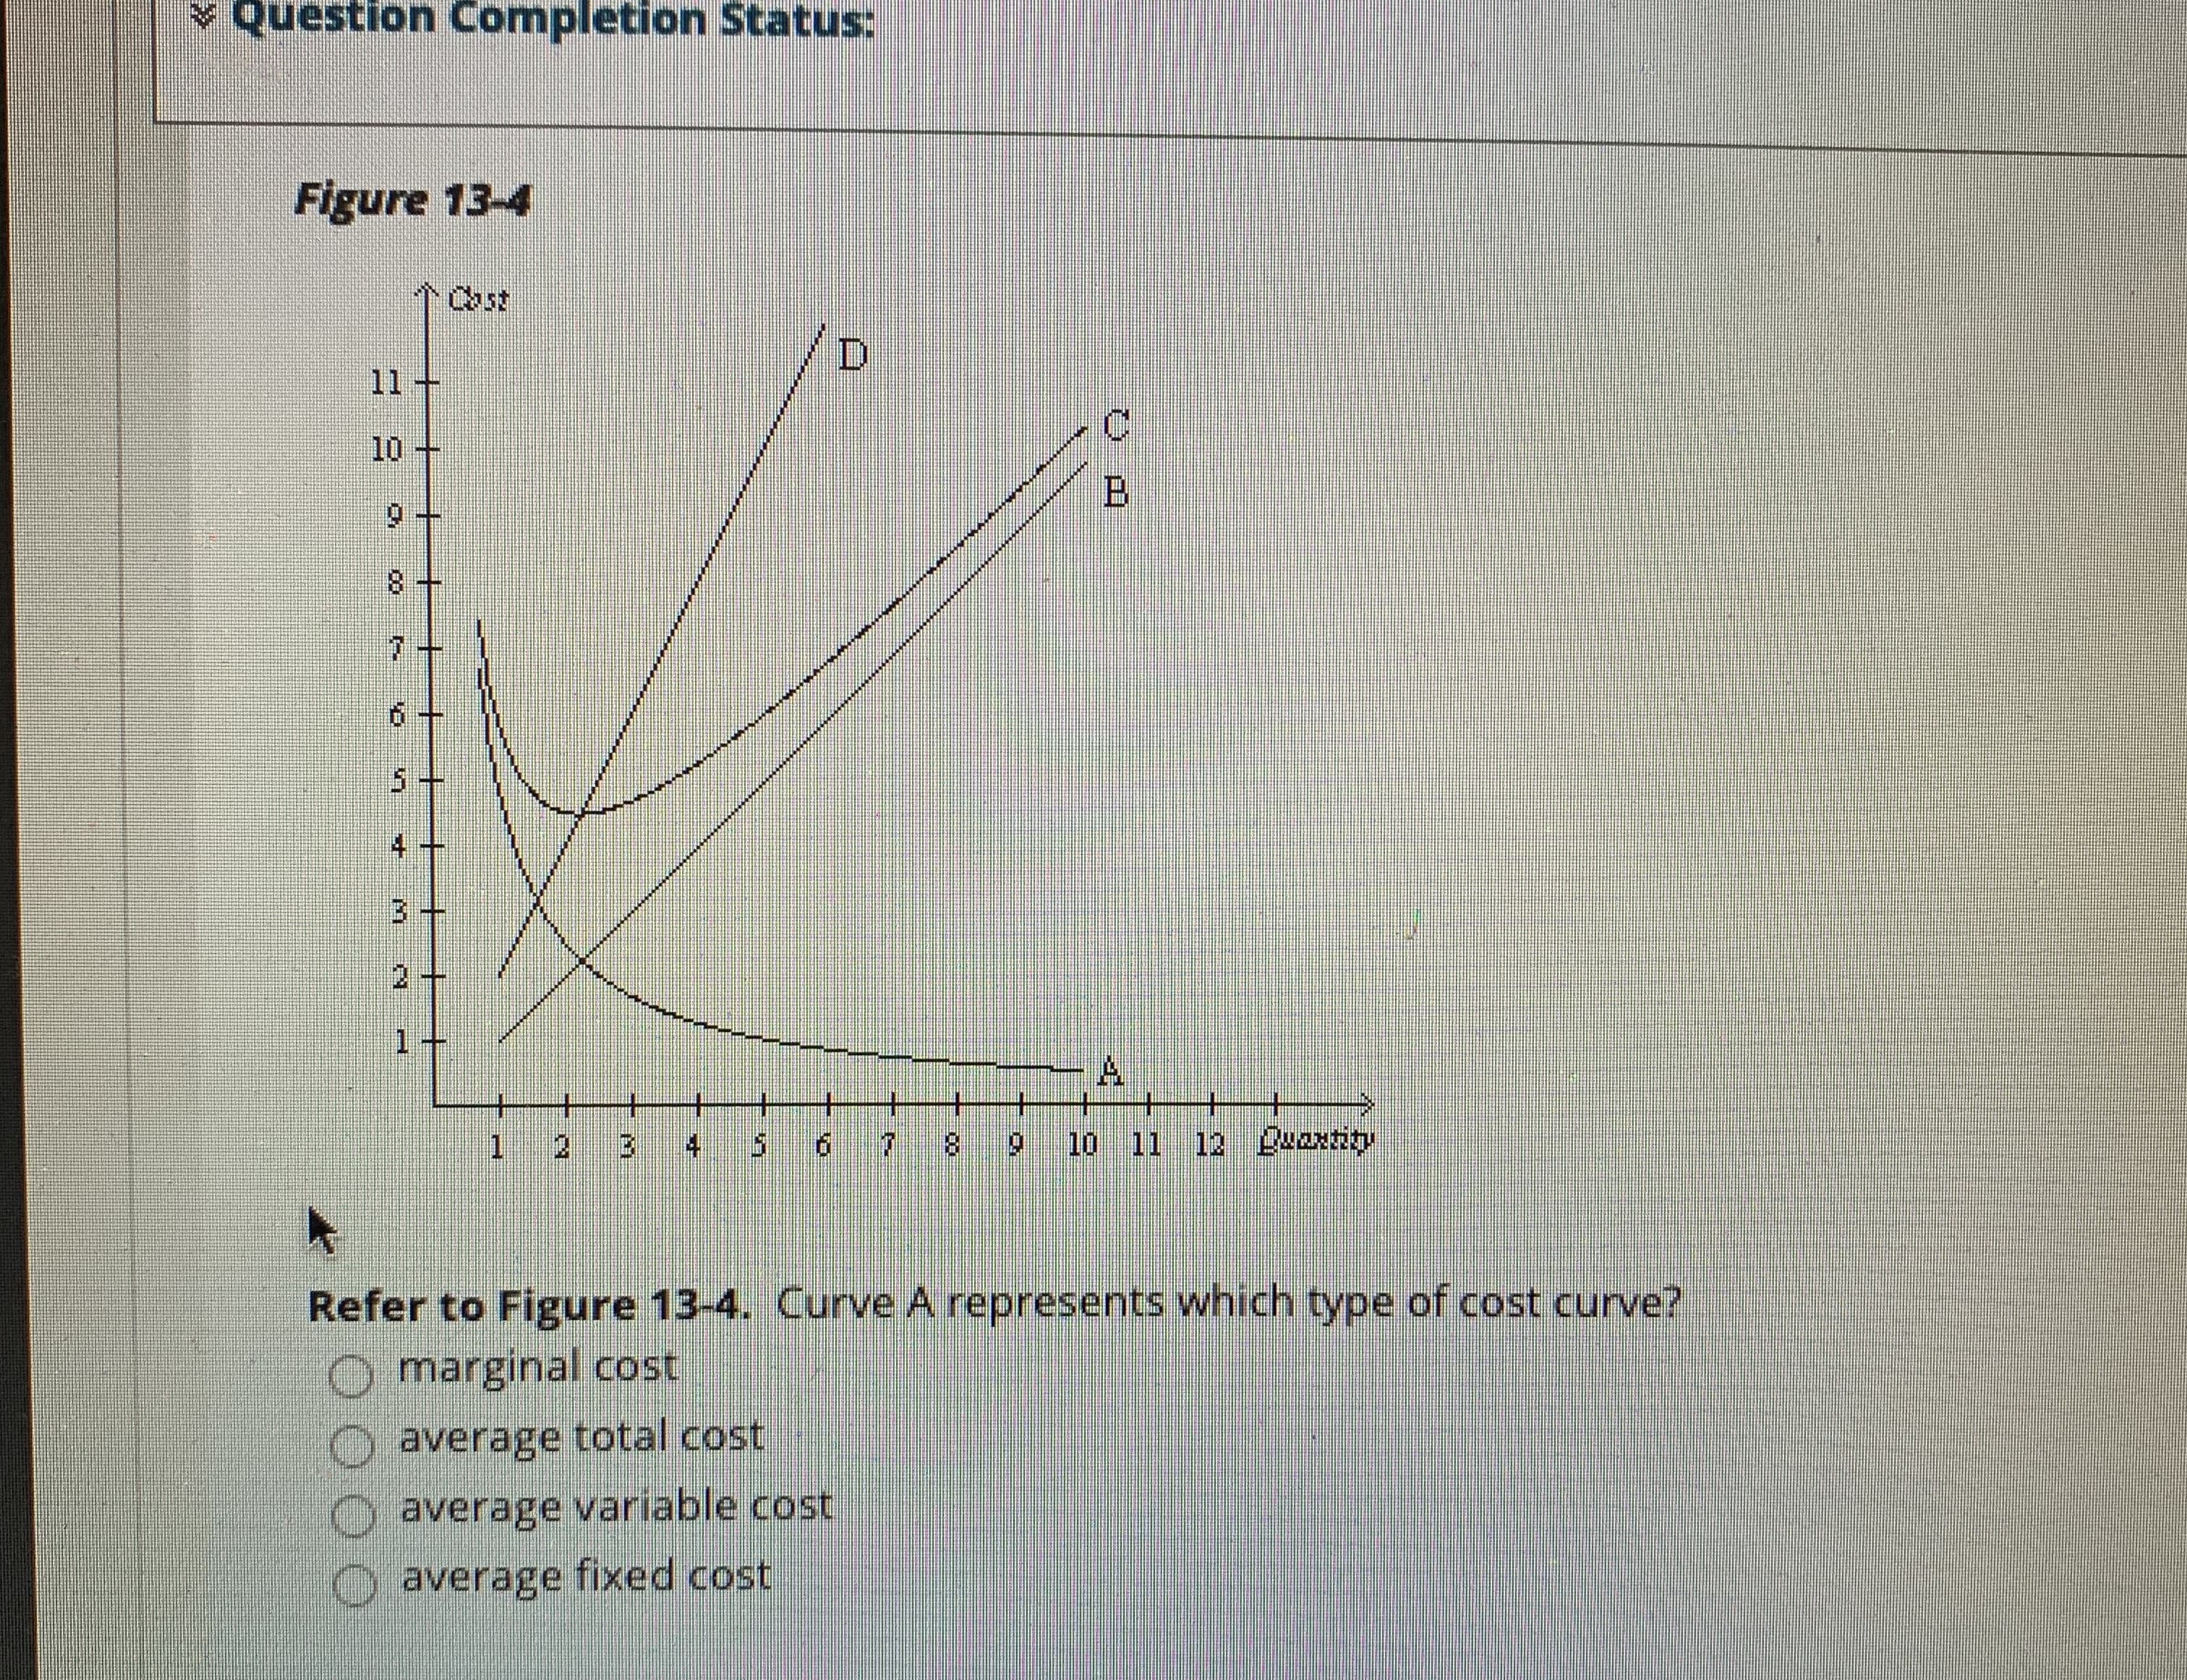 Refer to Figure 13-4. Curve A represents which type of cost curve?
O marginal cost
O average total cost
O average variable cost
average fixed cost
